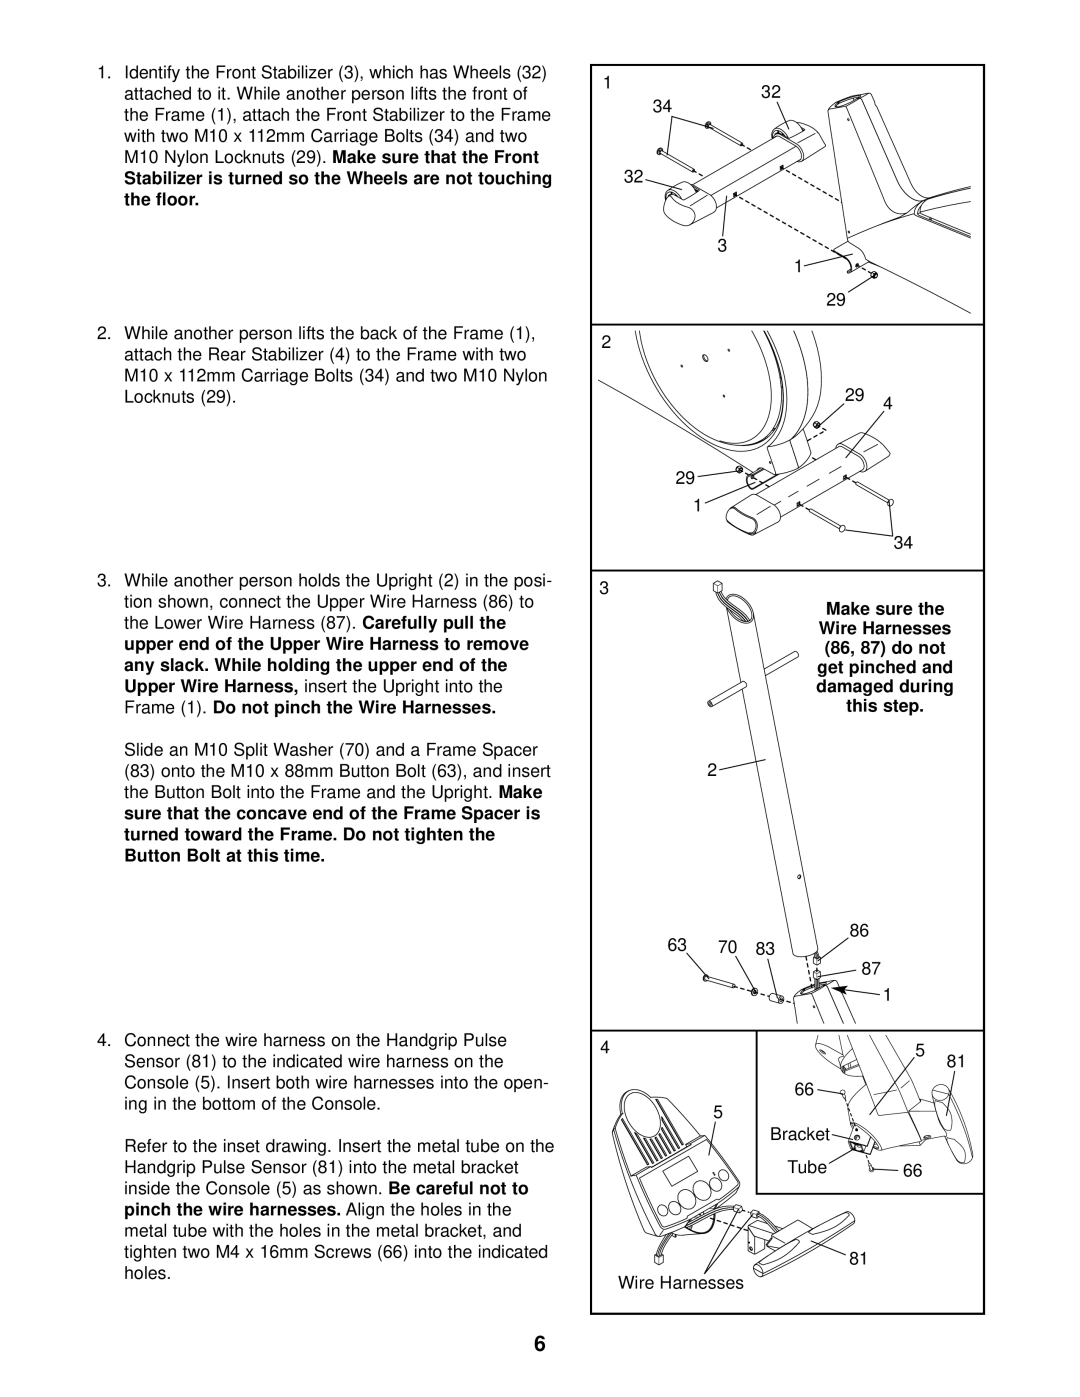 ProForm 831.285284 the Lower Wire Harness, Upper Wire Harness, Frame 1. Do not pinch the Wire Harnesses, this step 